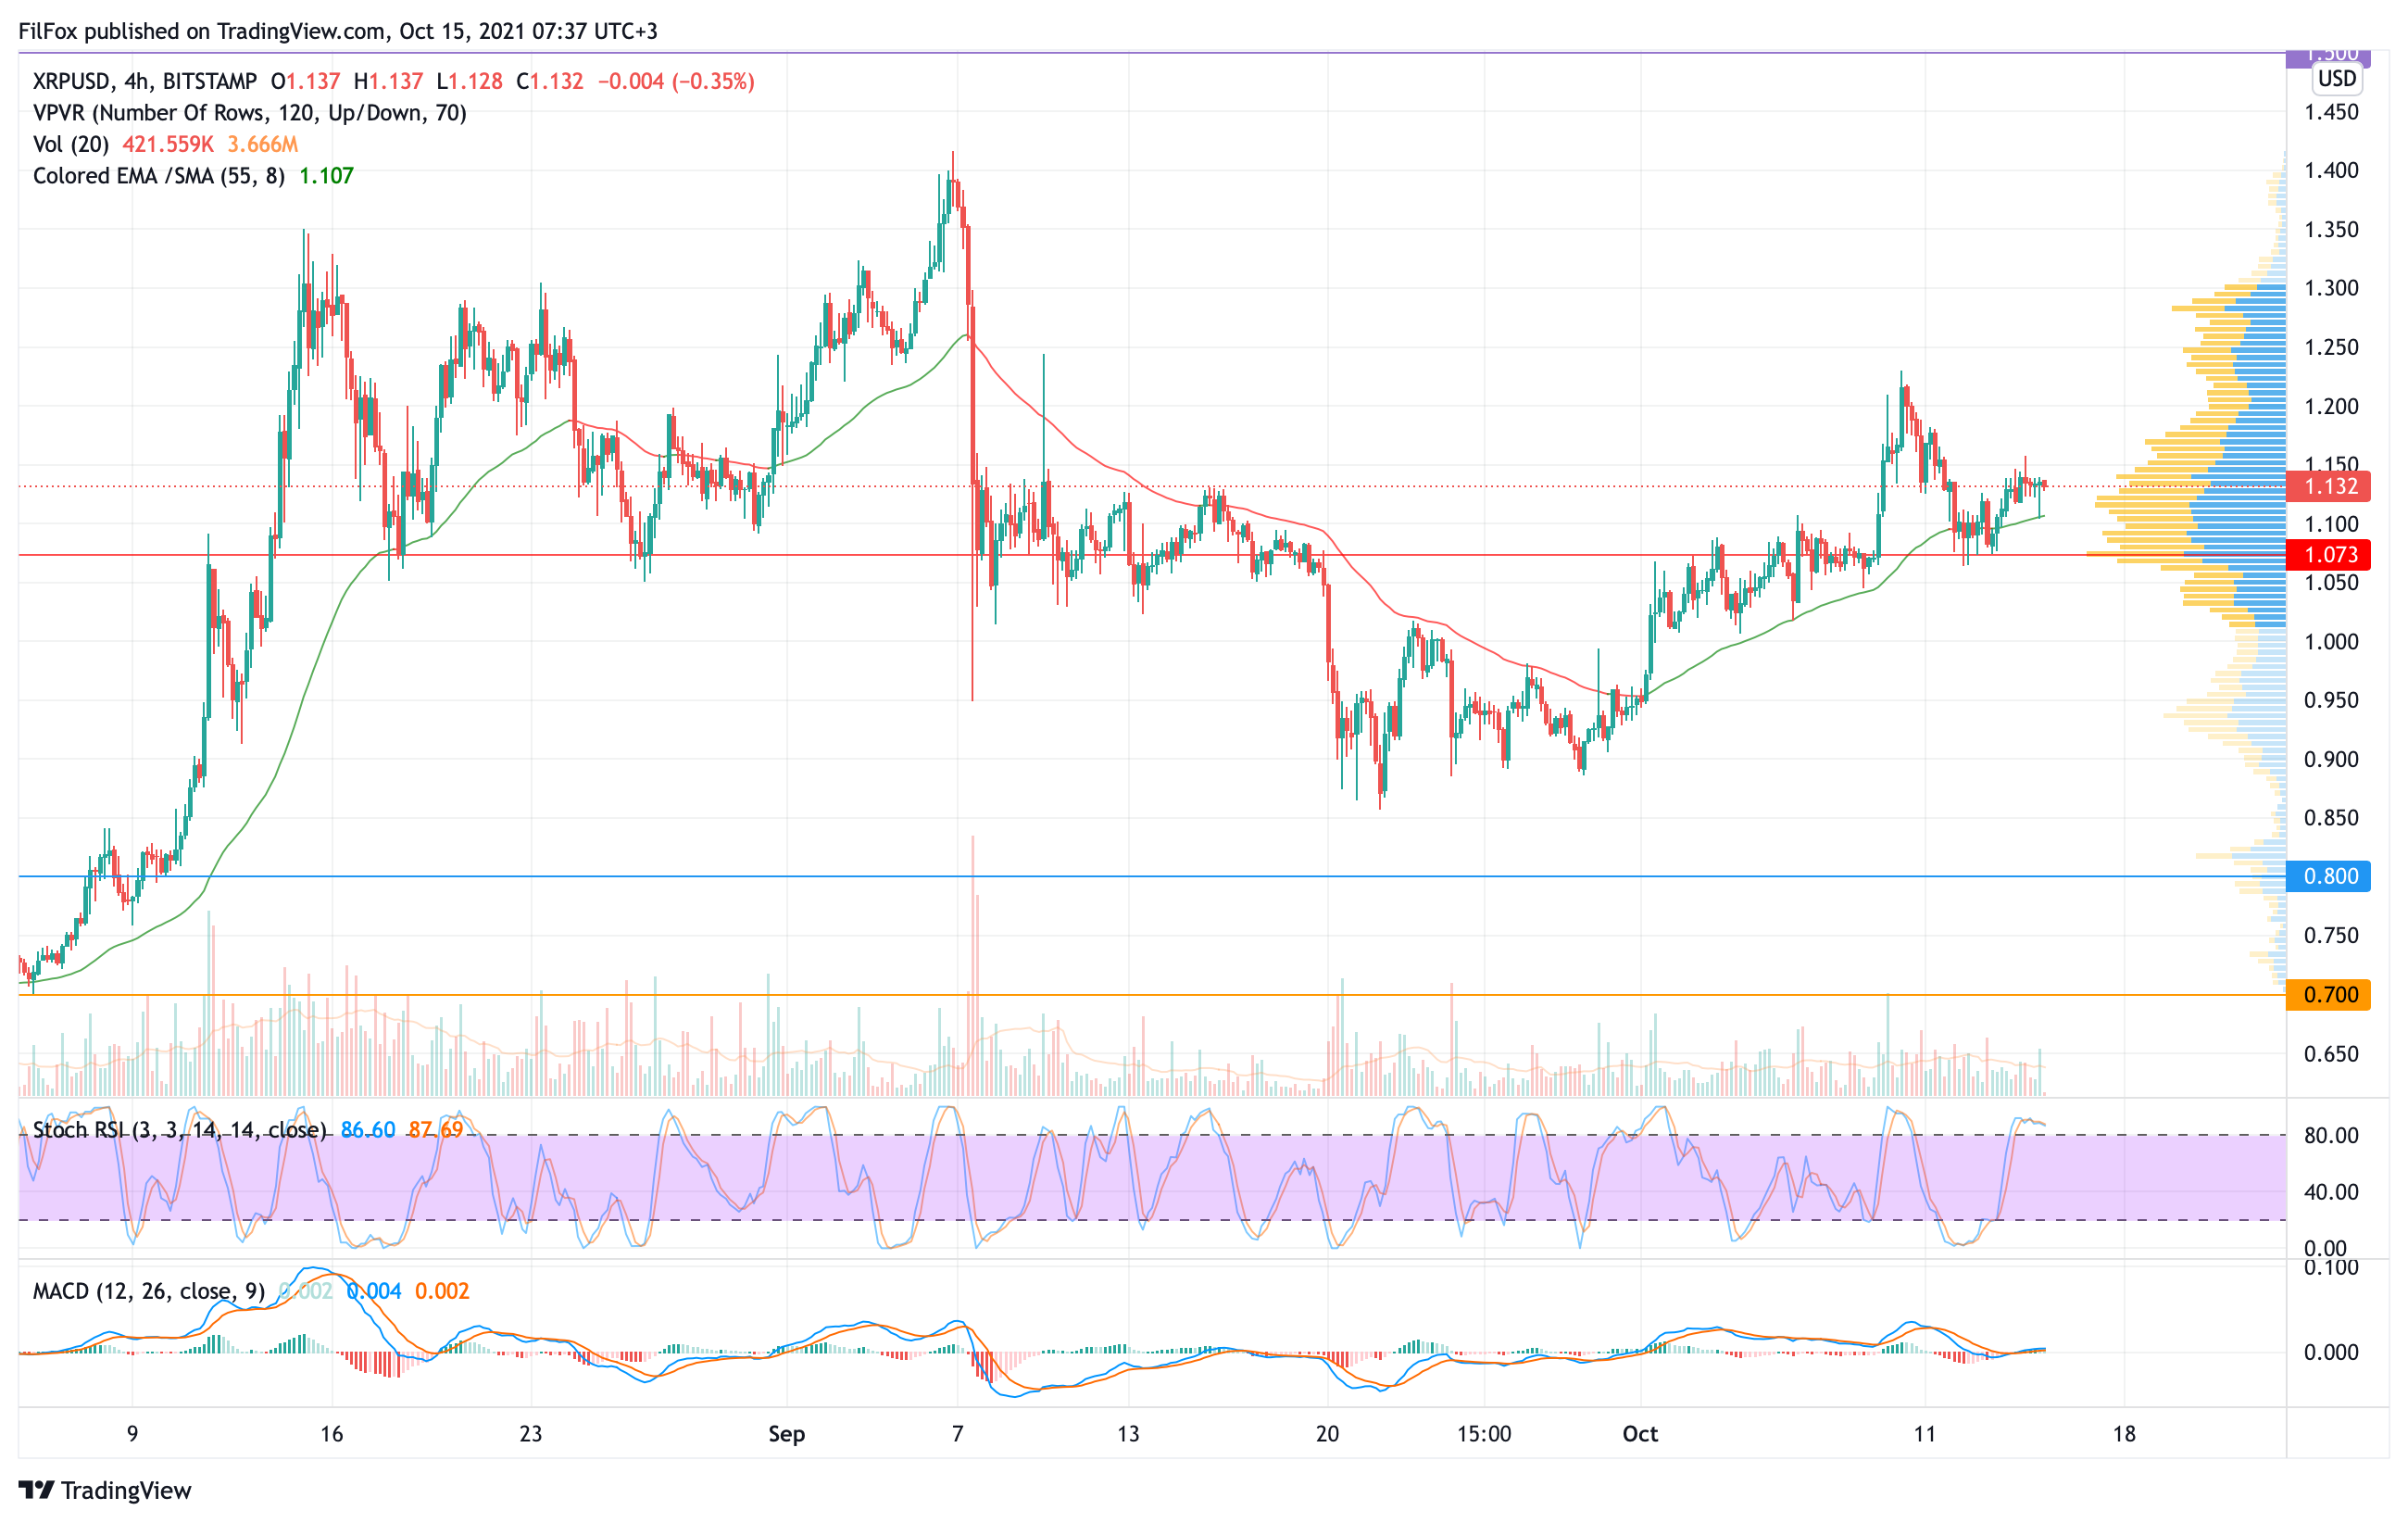 Analysis of the prices of Bitcoin, Ethereum, XRP for 10/15/2021